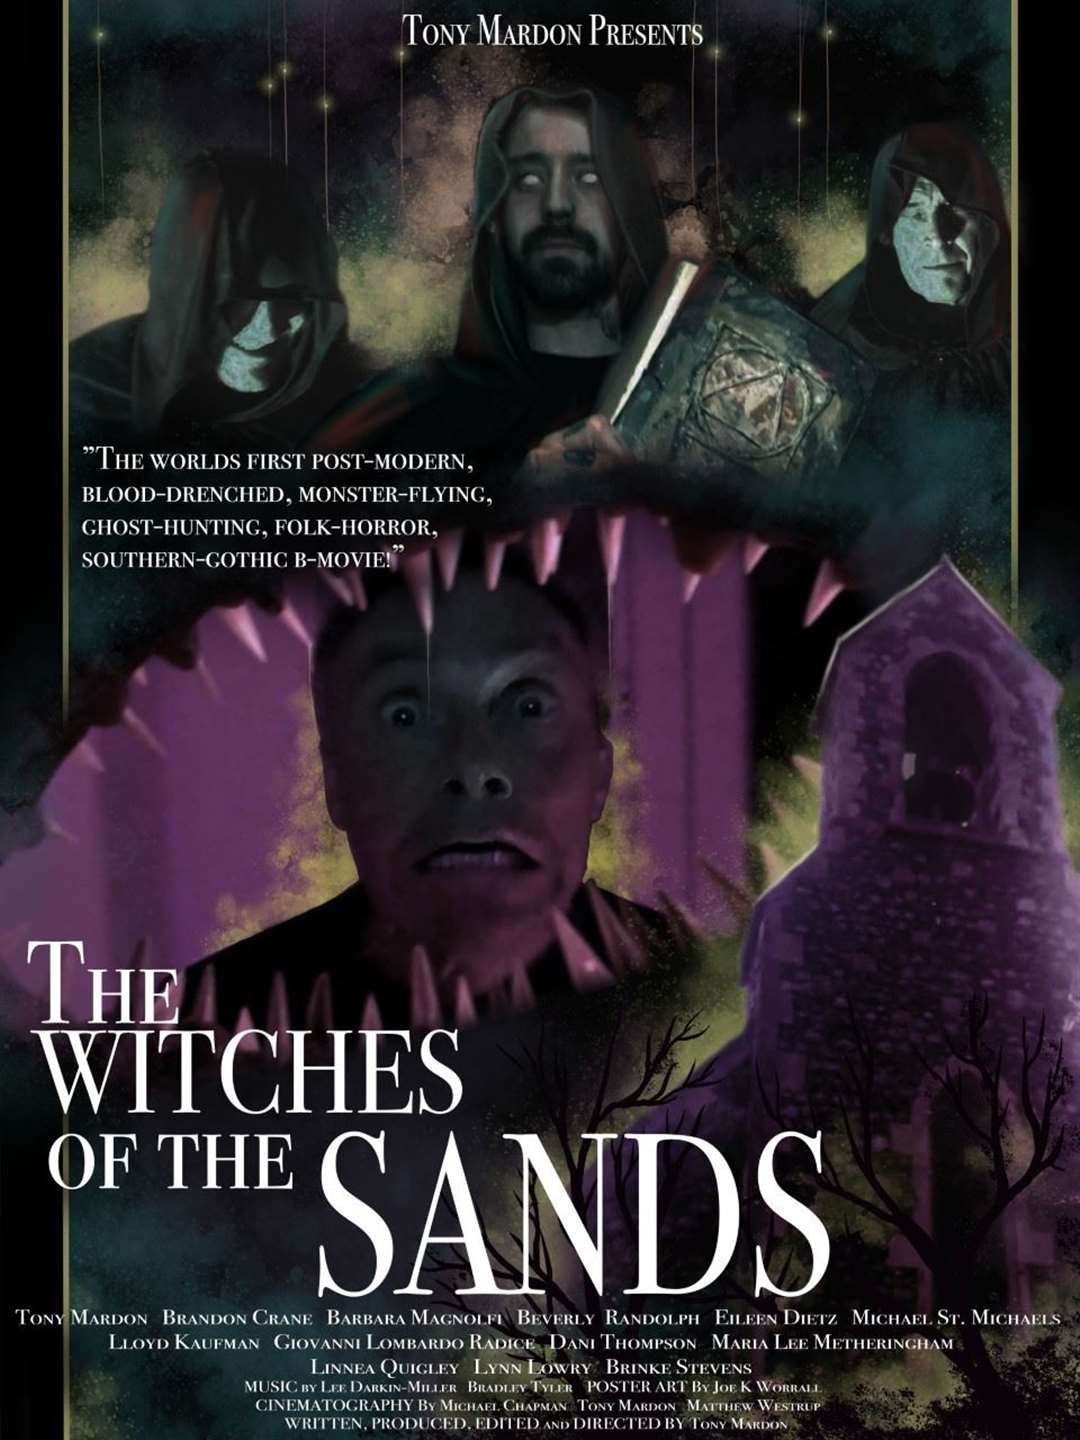 The Witches of the Sands poster. Picture: Tony Mardon